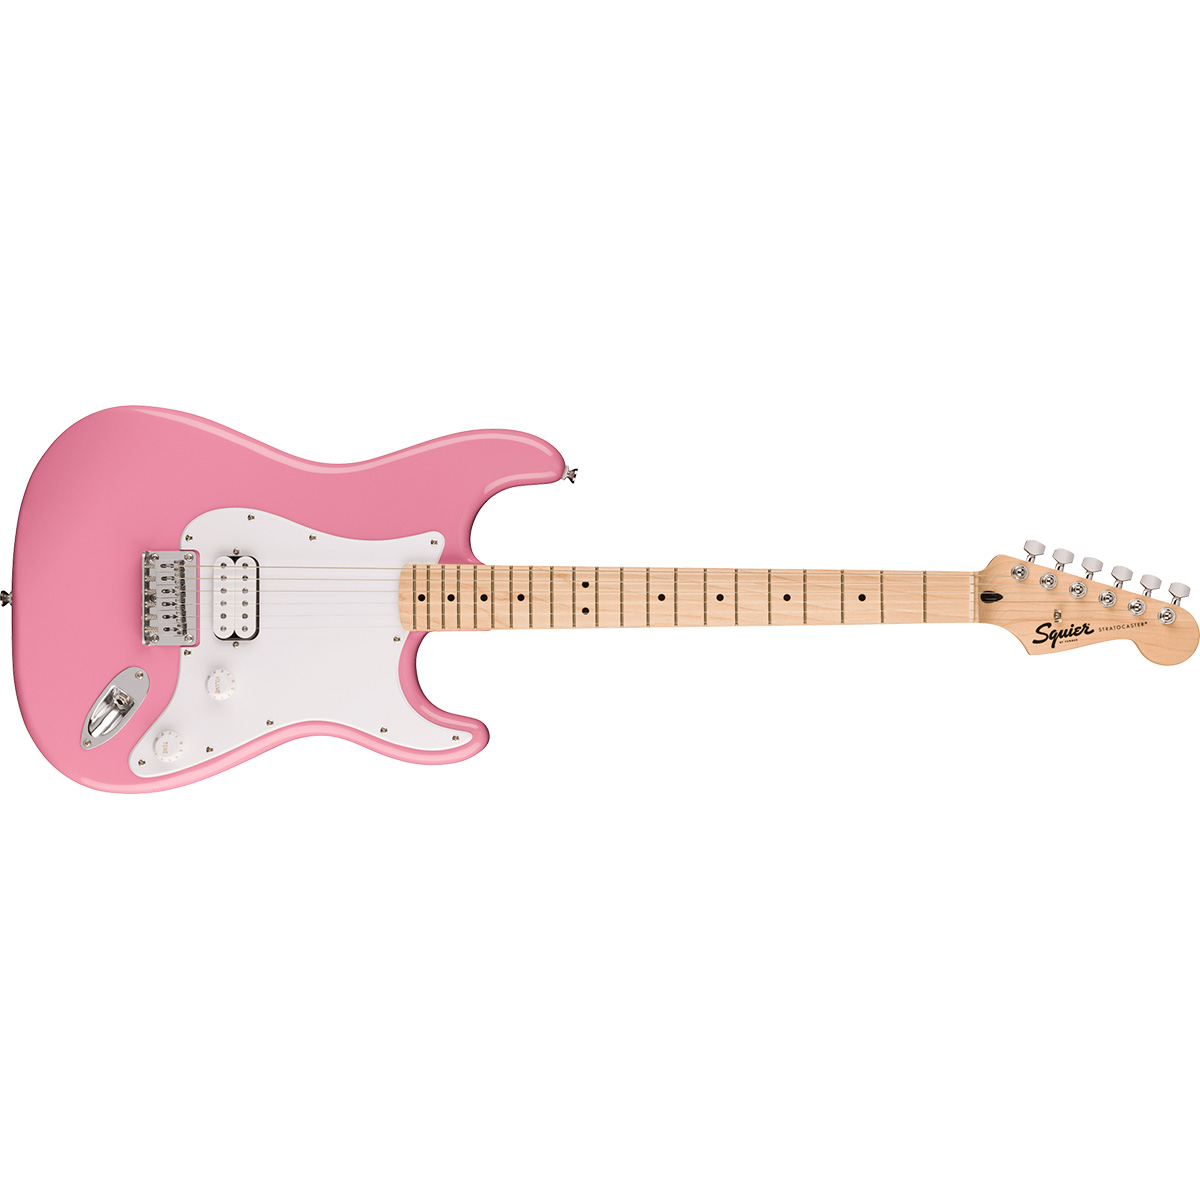 Squier by Fender SONIC STRATOCASTER HT Flash Pink エレキギター 